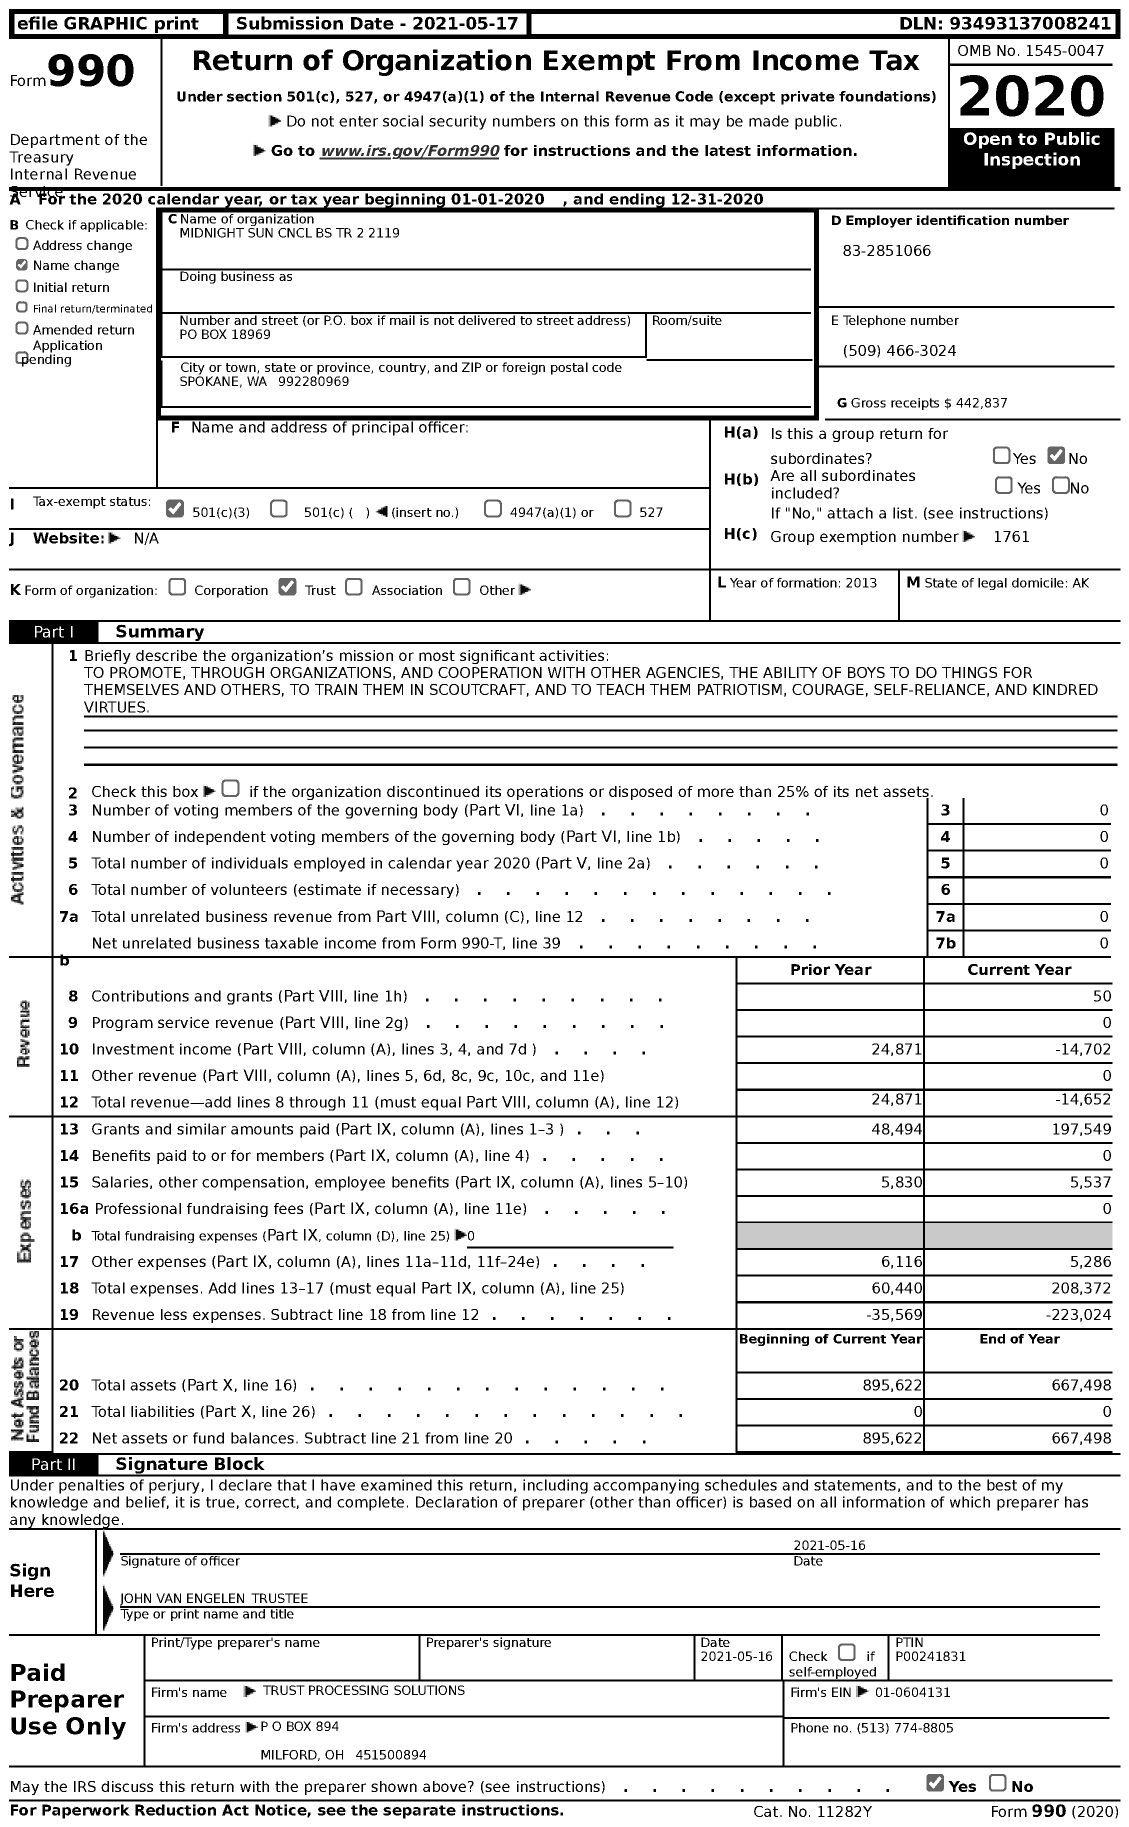 Image of first page of 2020 Form 990 for Boy Scouts of America - 696 Midnight Sun CNCL BS TR 2